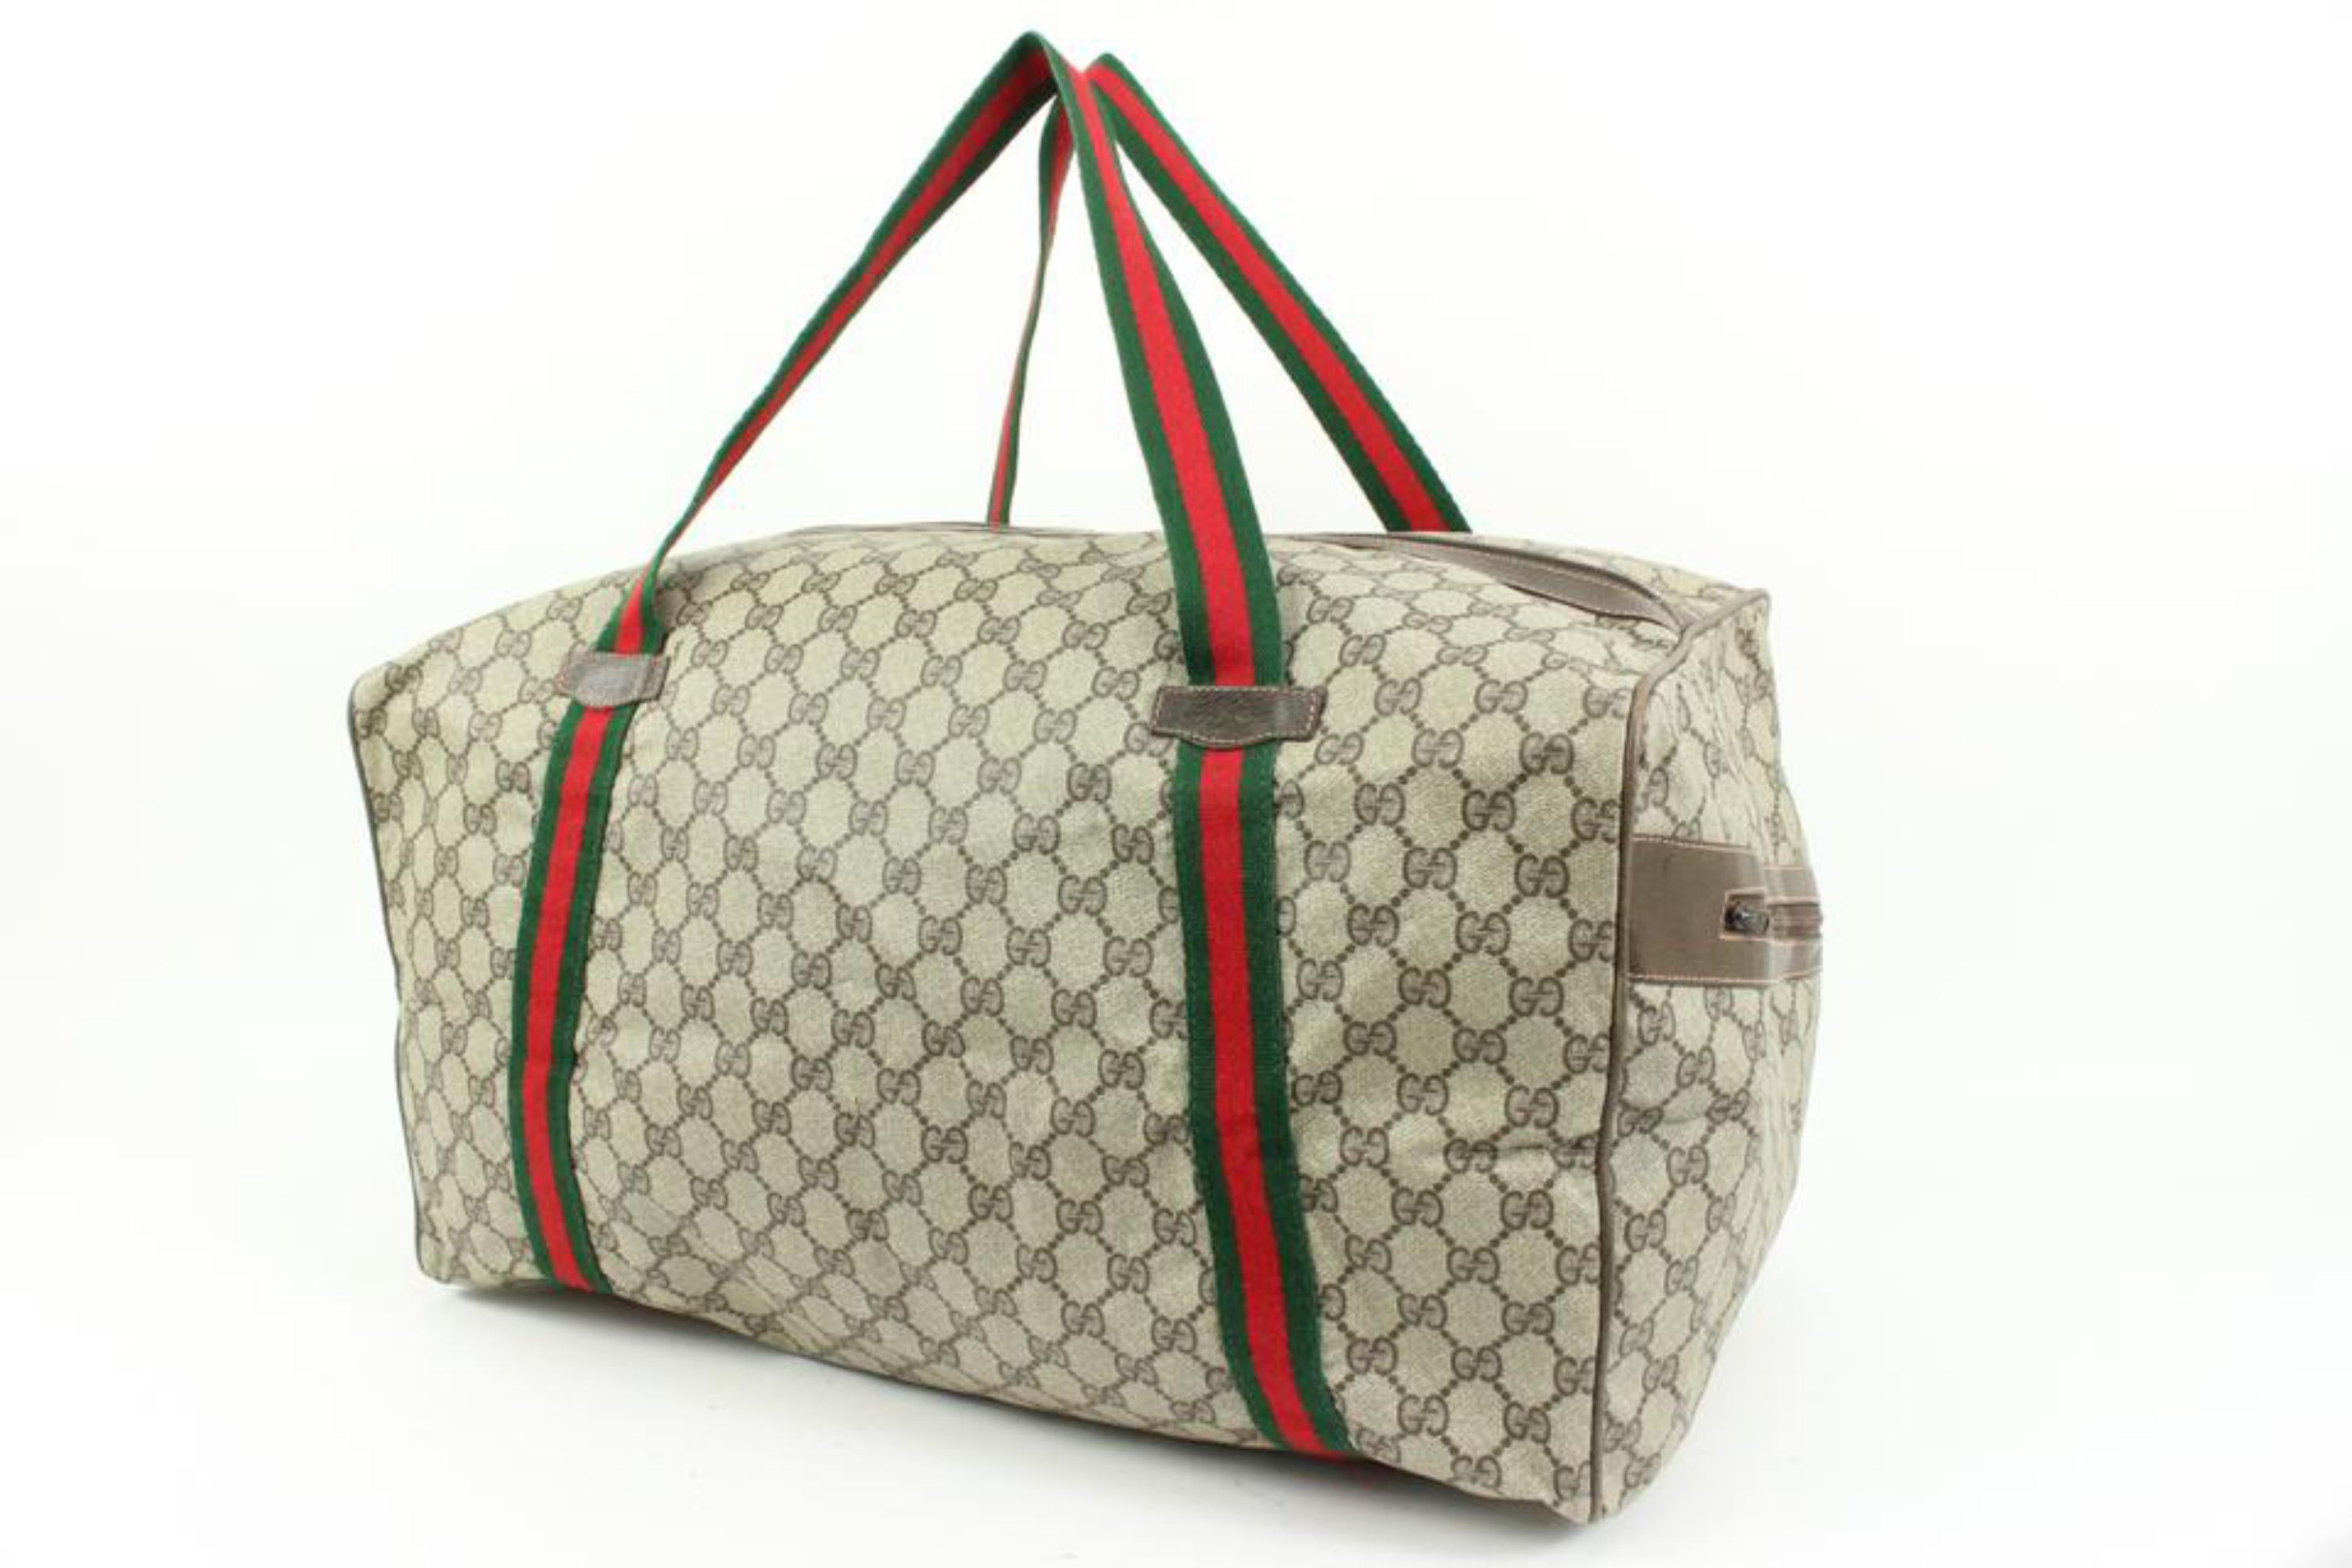 Gucci Large Supreme GG Web Boston Duffle bag 80gz422s
Made In: Italy
Measurements: Length:  18.5